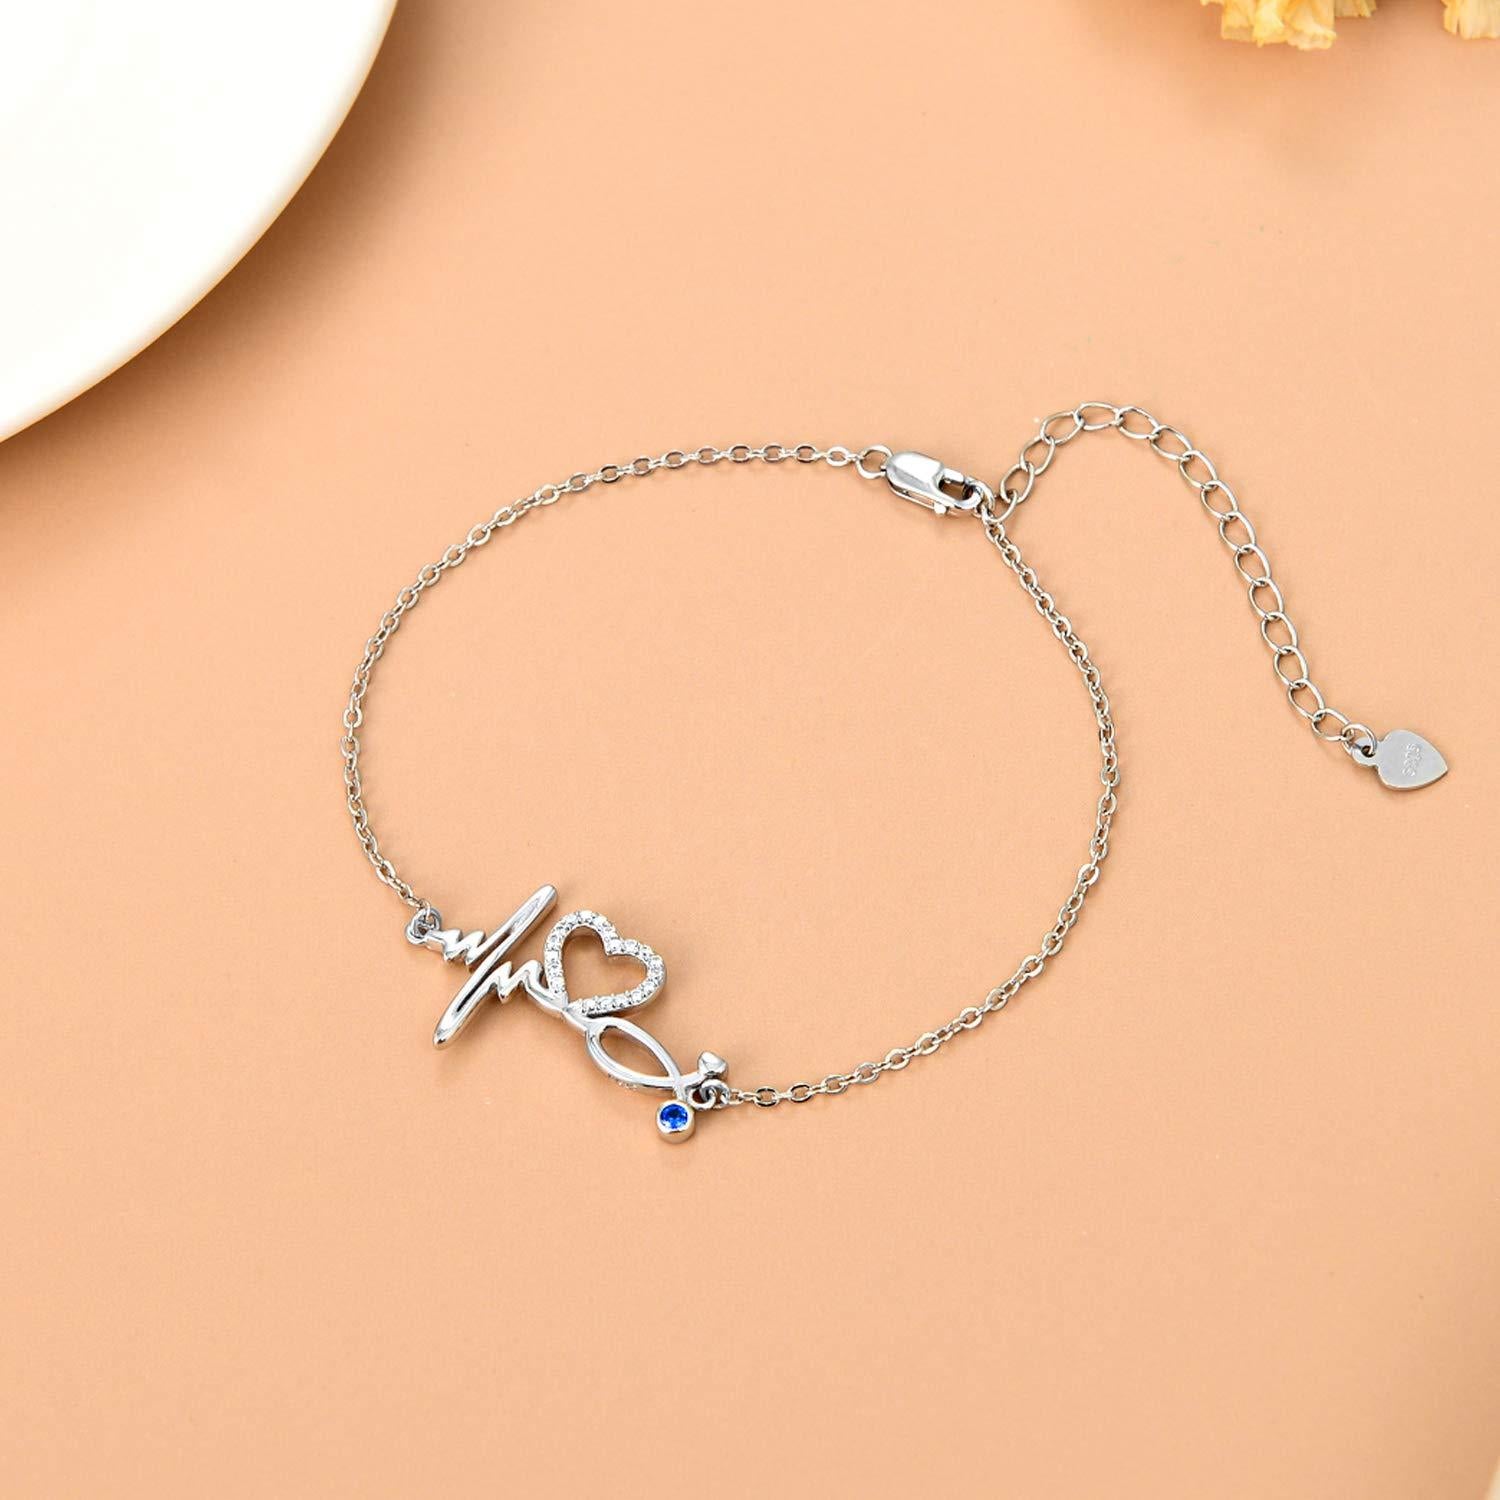 Medical Stethoscope Bracelet 3 Colors Women Medical Bracelet Special Gift  For Nurse Doctor Stethoscope Charms Accessories - AliExpress